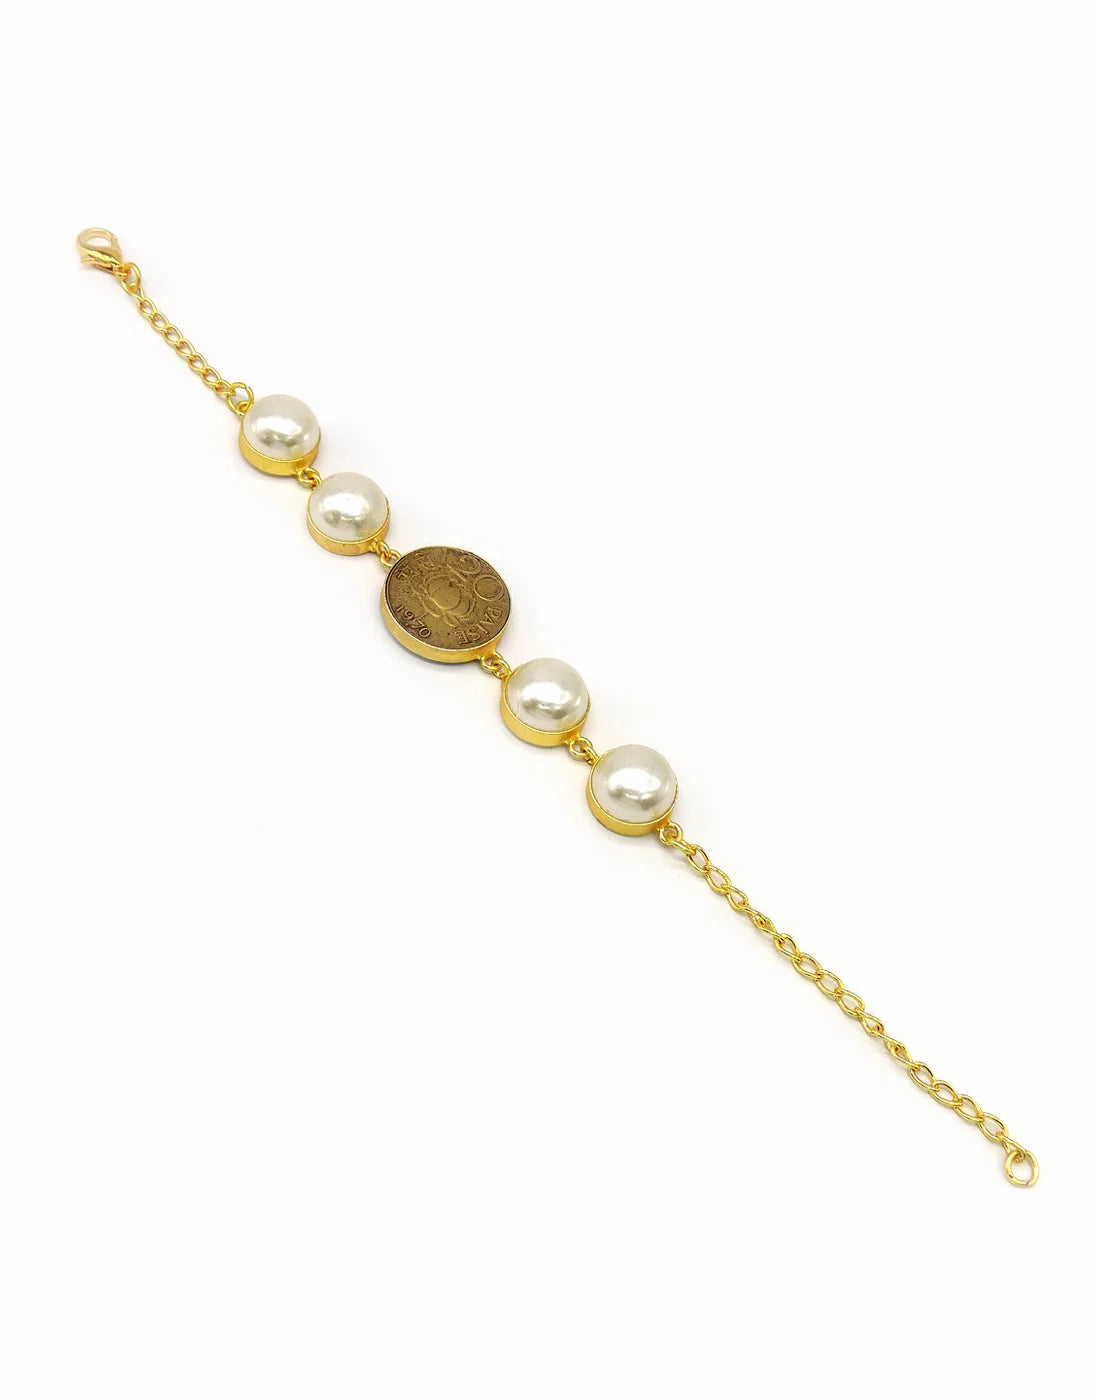 Coin & Pearl Bracelet- Handcrafted Jewellery from Dori